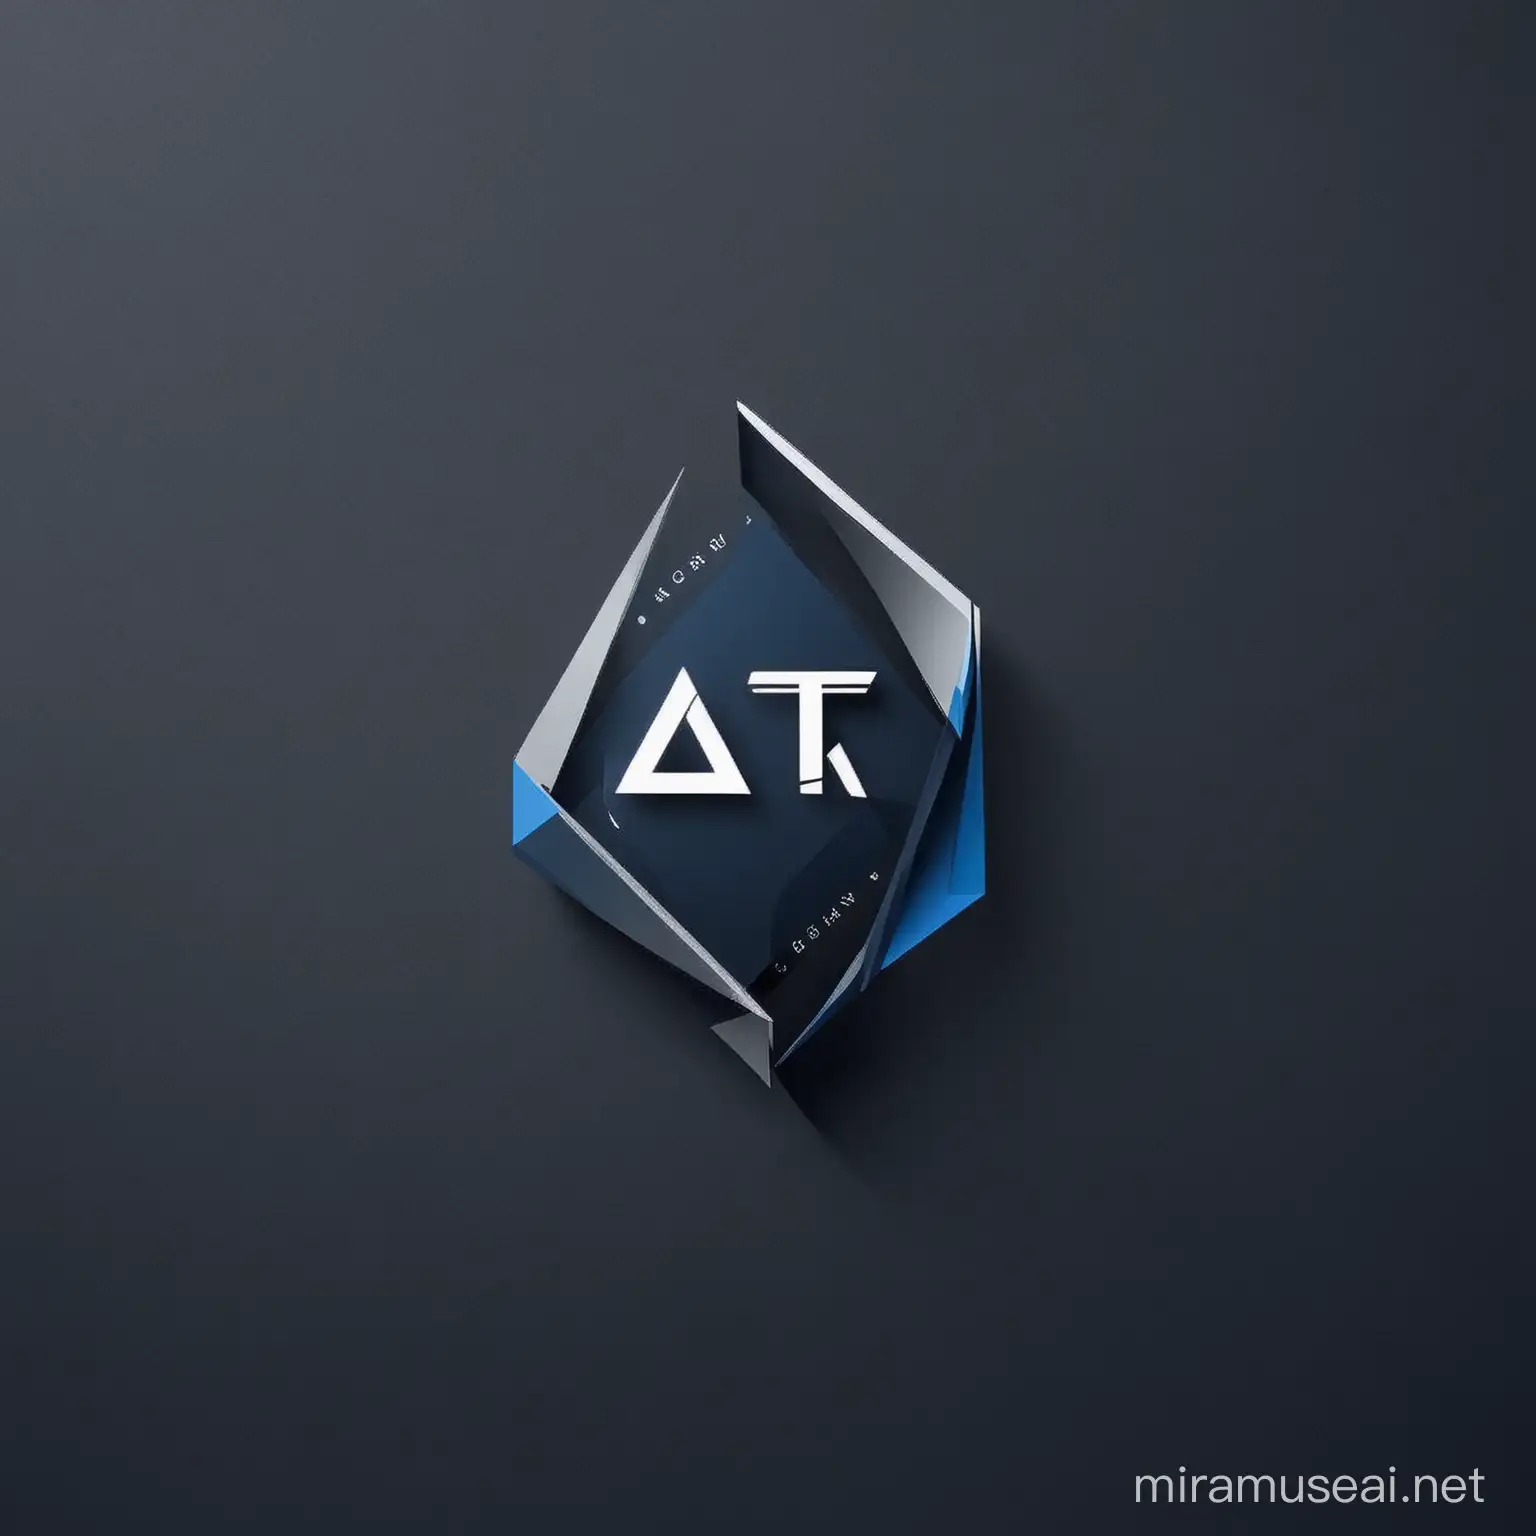 Minimalist Logo Design for AAT GROUP Stability and Innovation in Gray and Dark Blue